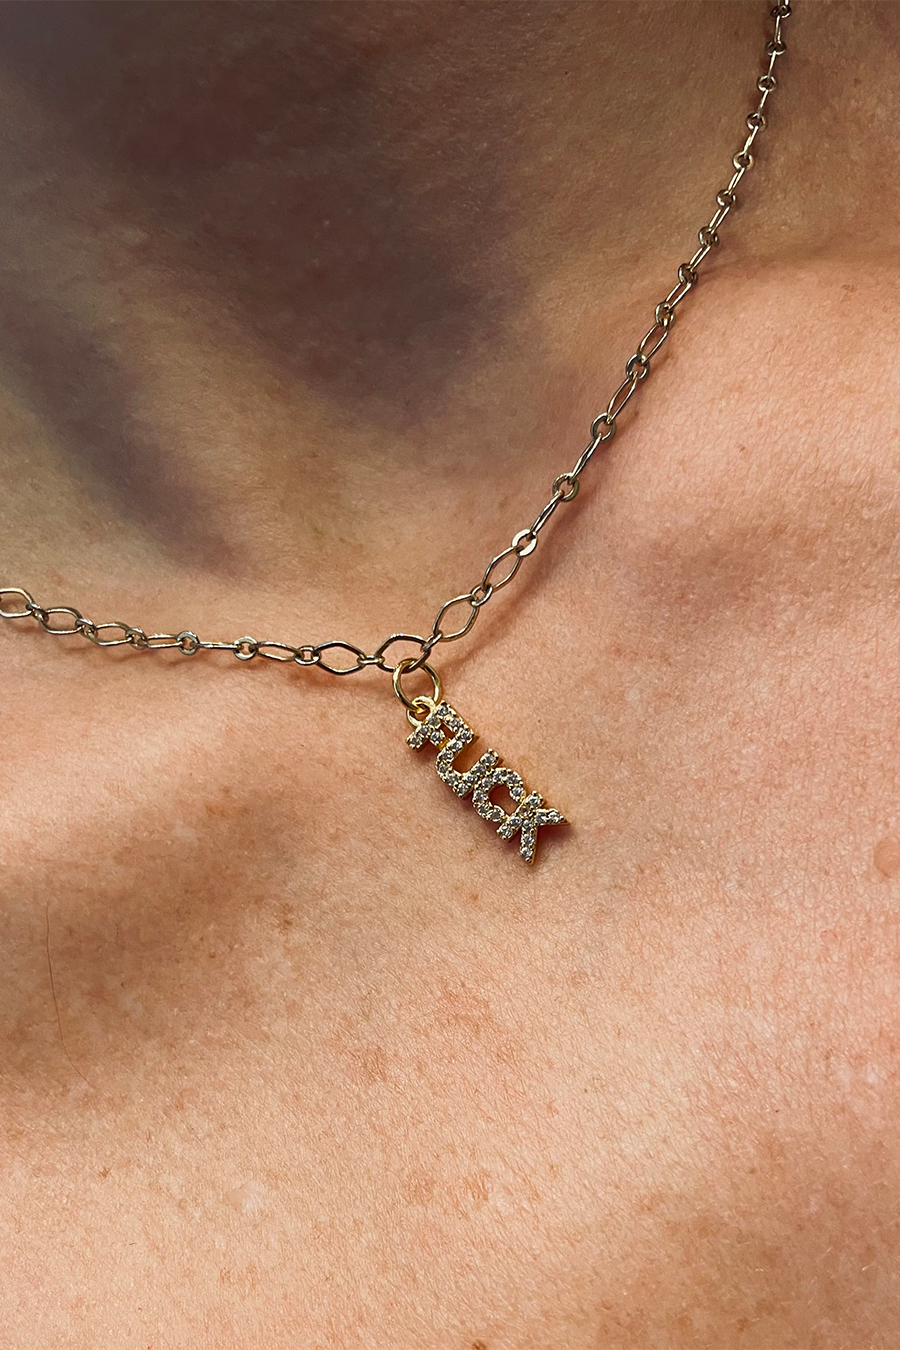 Fuck Necklace - Main Image Number 3 of 3